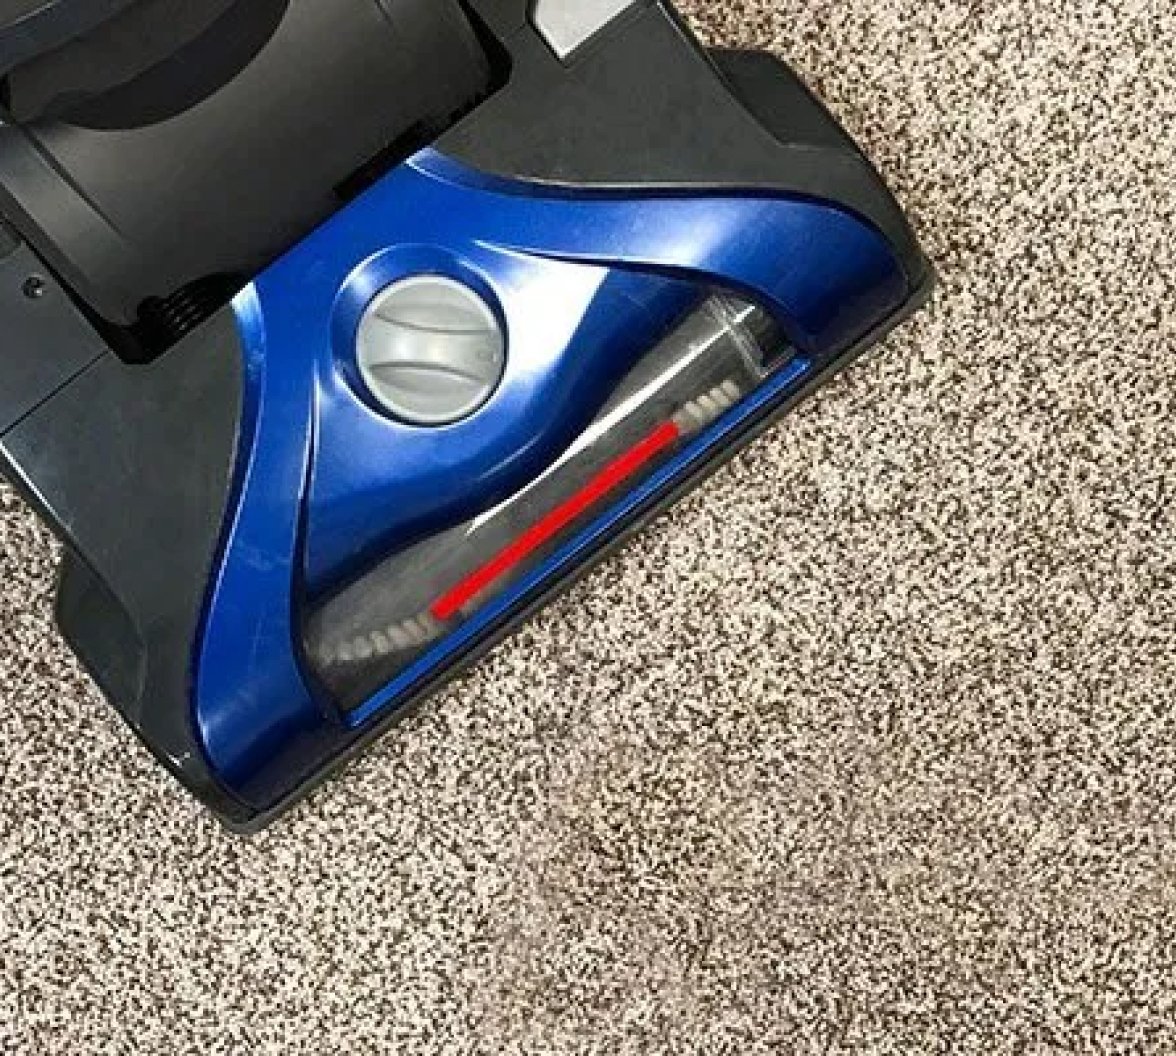 15 Vacuuming tips to keep your carpet flooring pristine